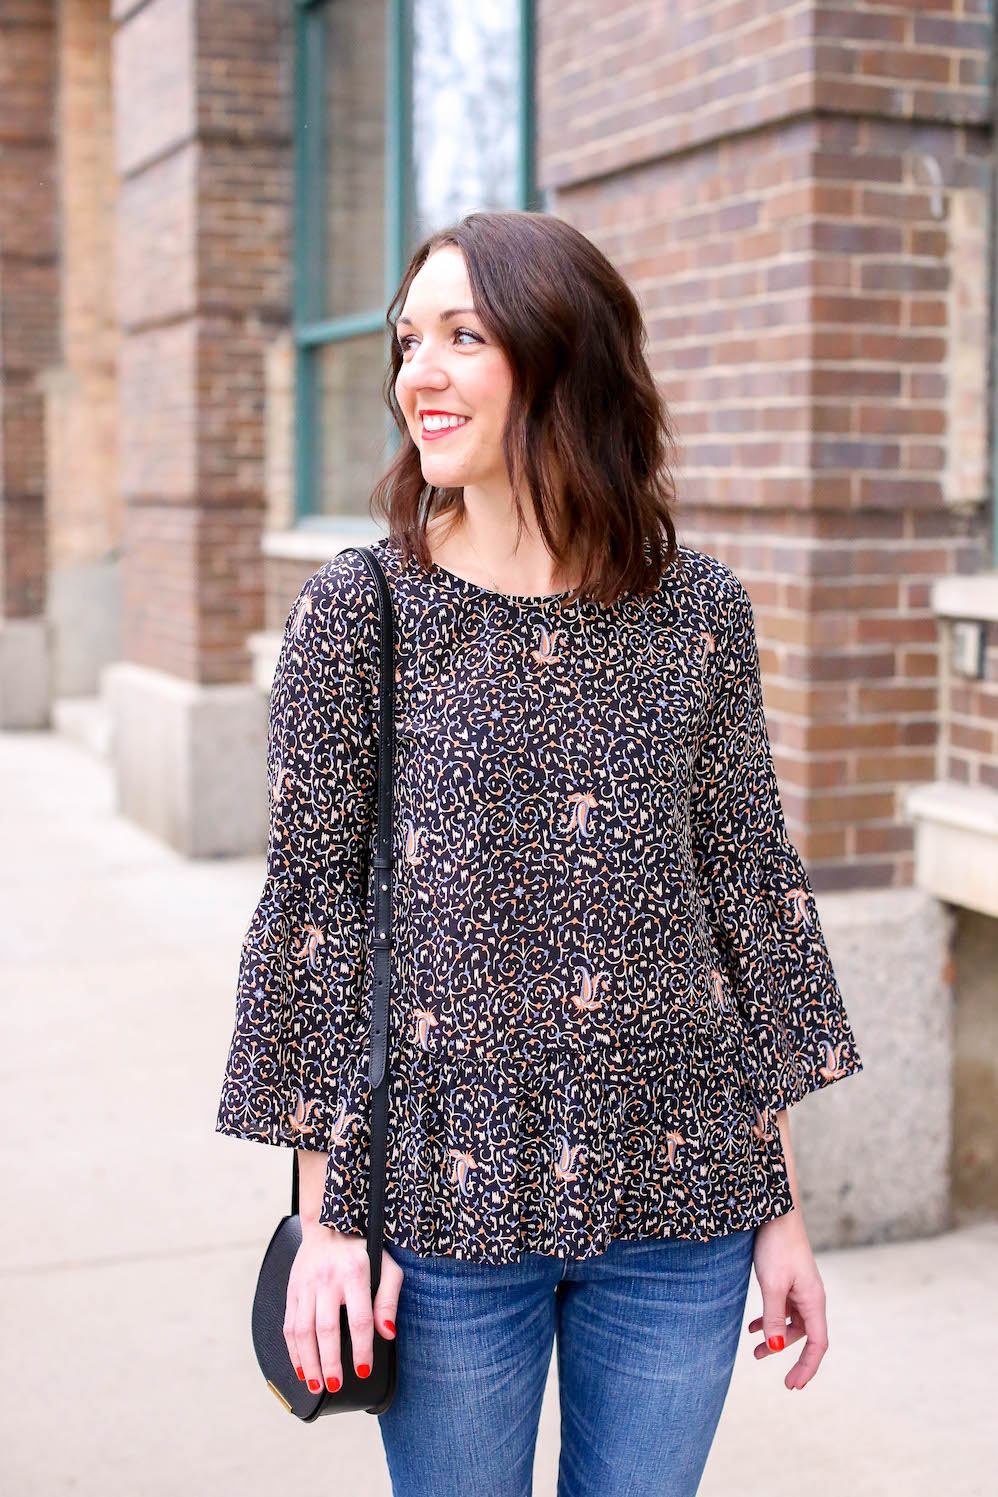 little black bag and floral peplum top